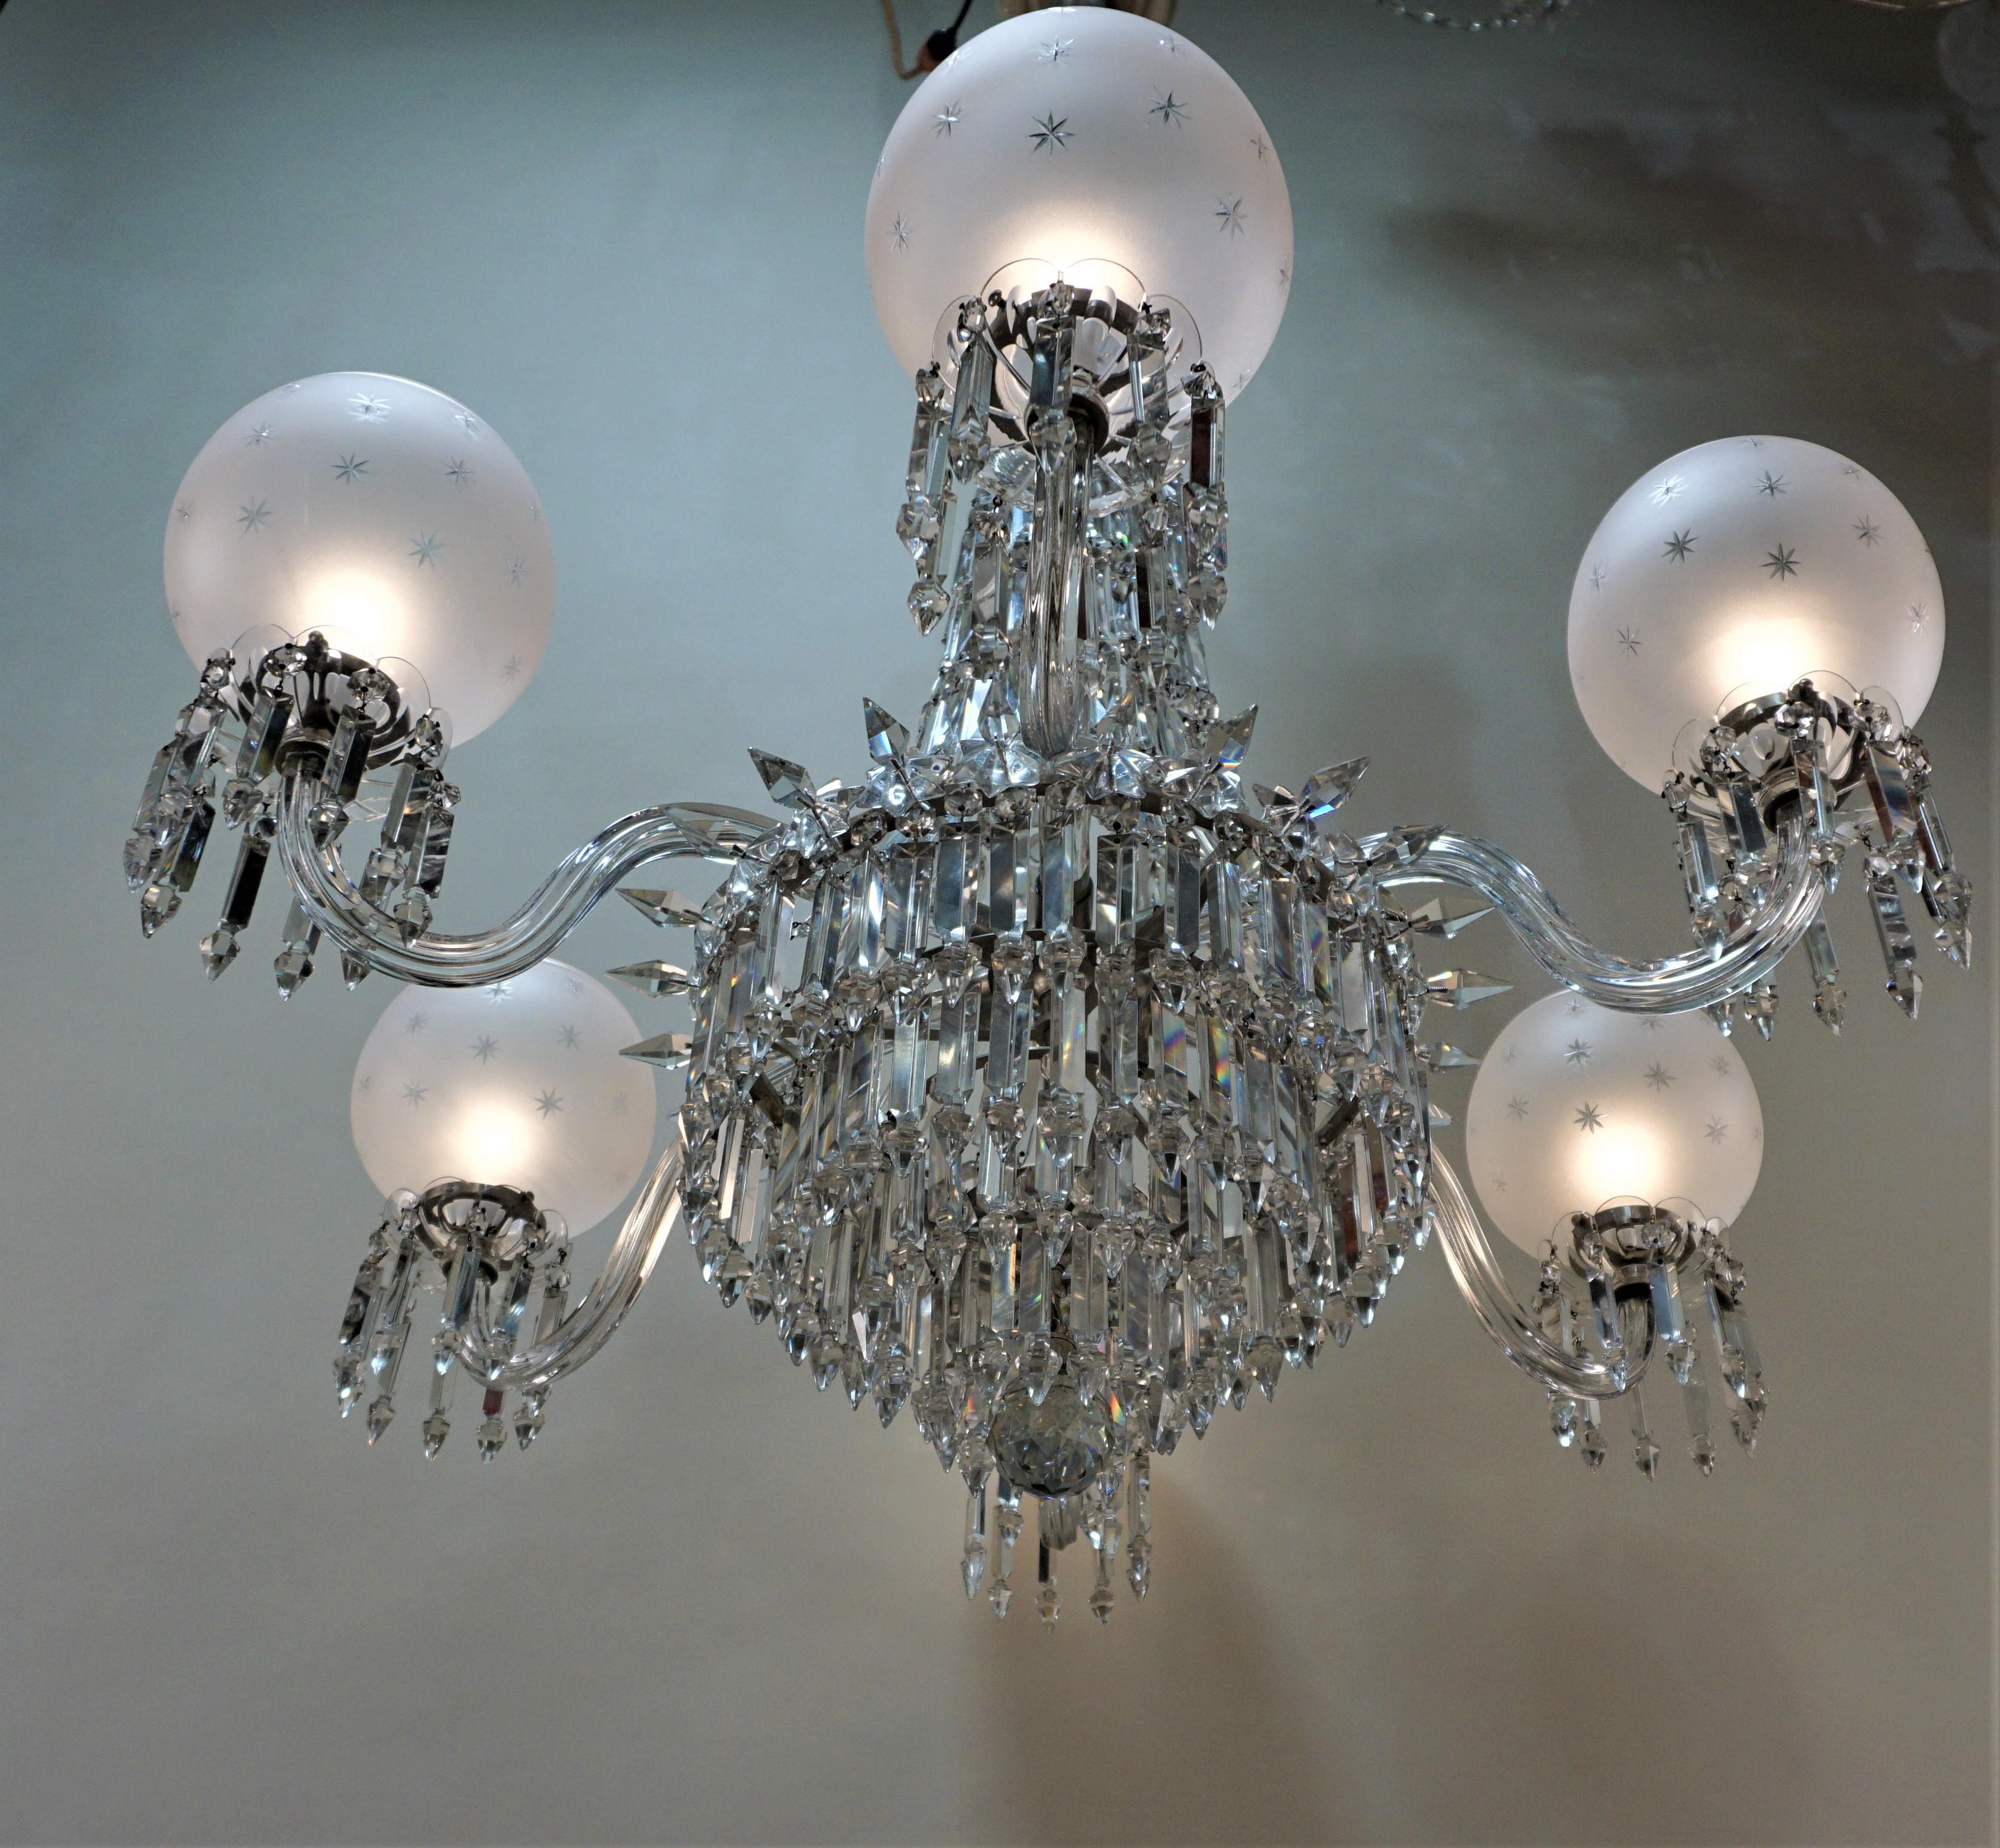 An exceptional rare 19th century English crystal six-arm gas chandelier with hundreds of original cut glass prisms reflect the light and dazzling.
Satin silver hardware.
 